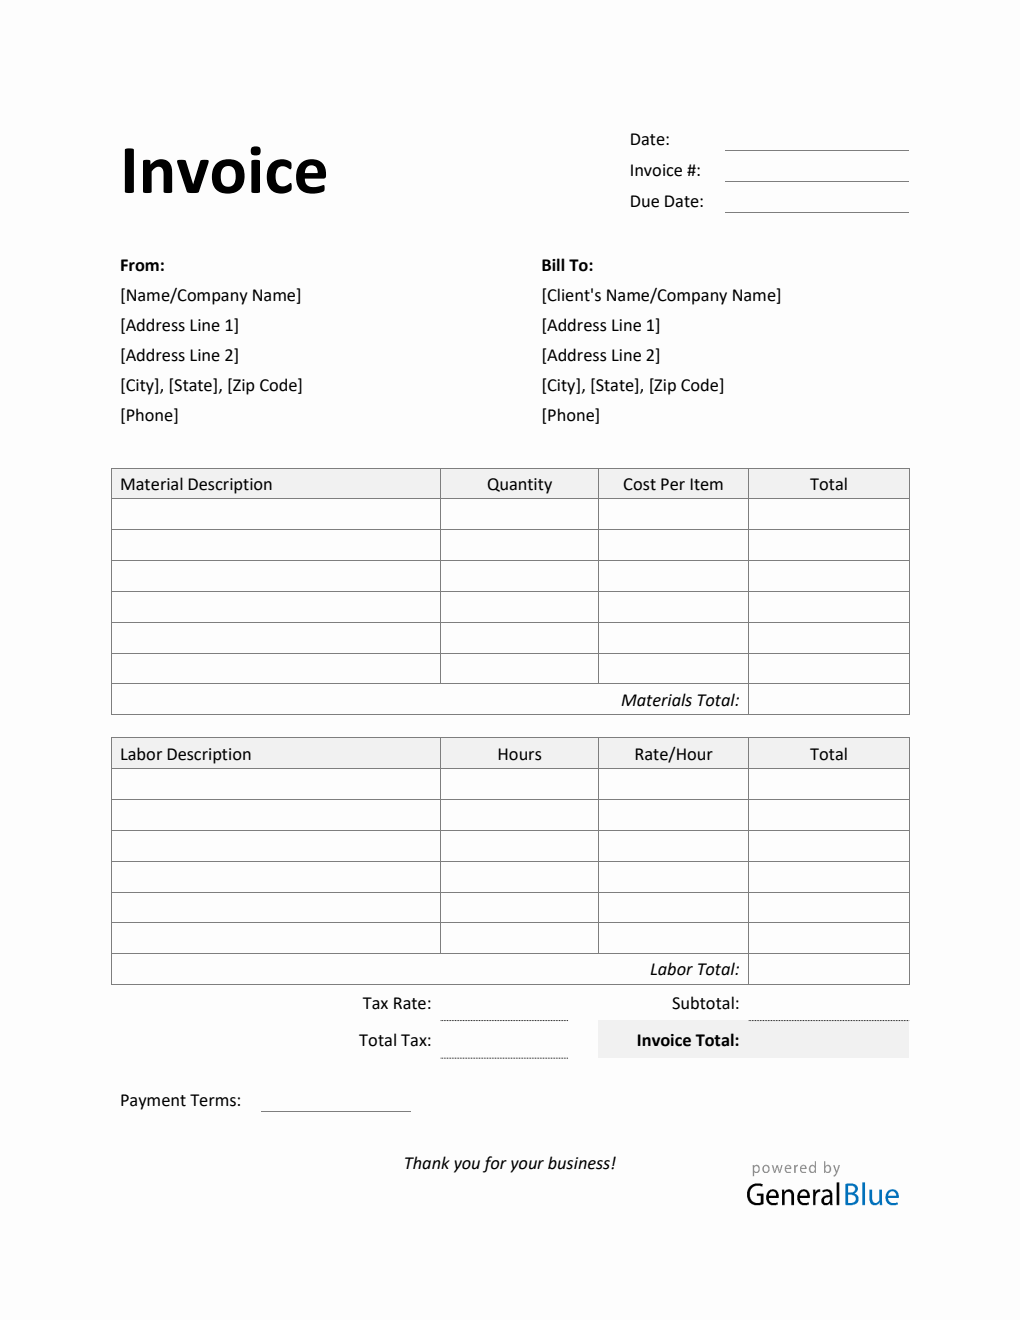 Time and Materials Invoice with Tax Calculation in Word (Simple)